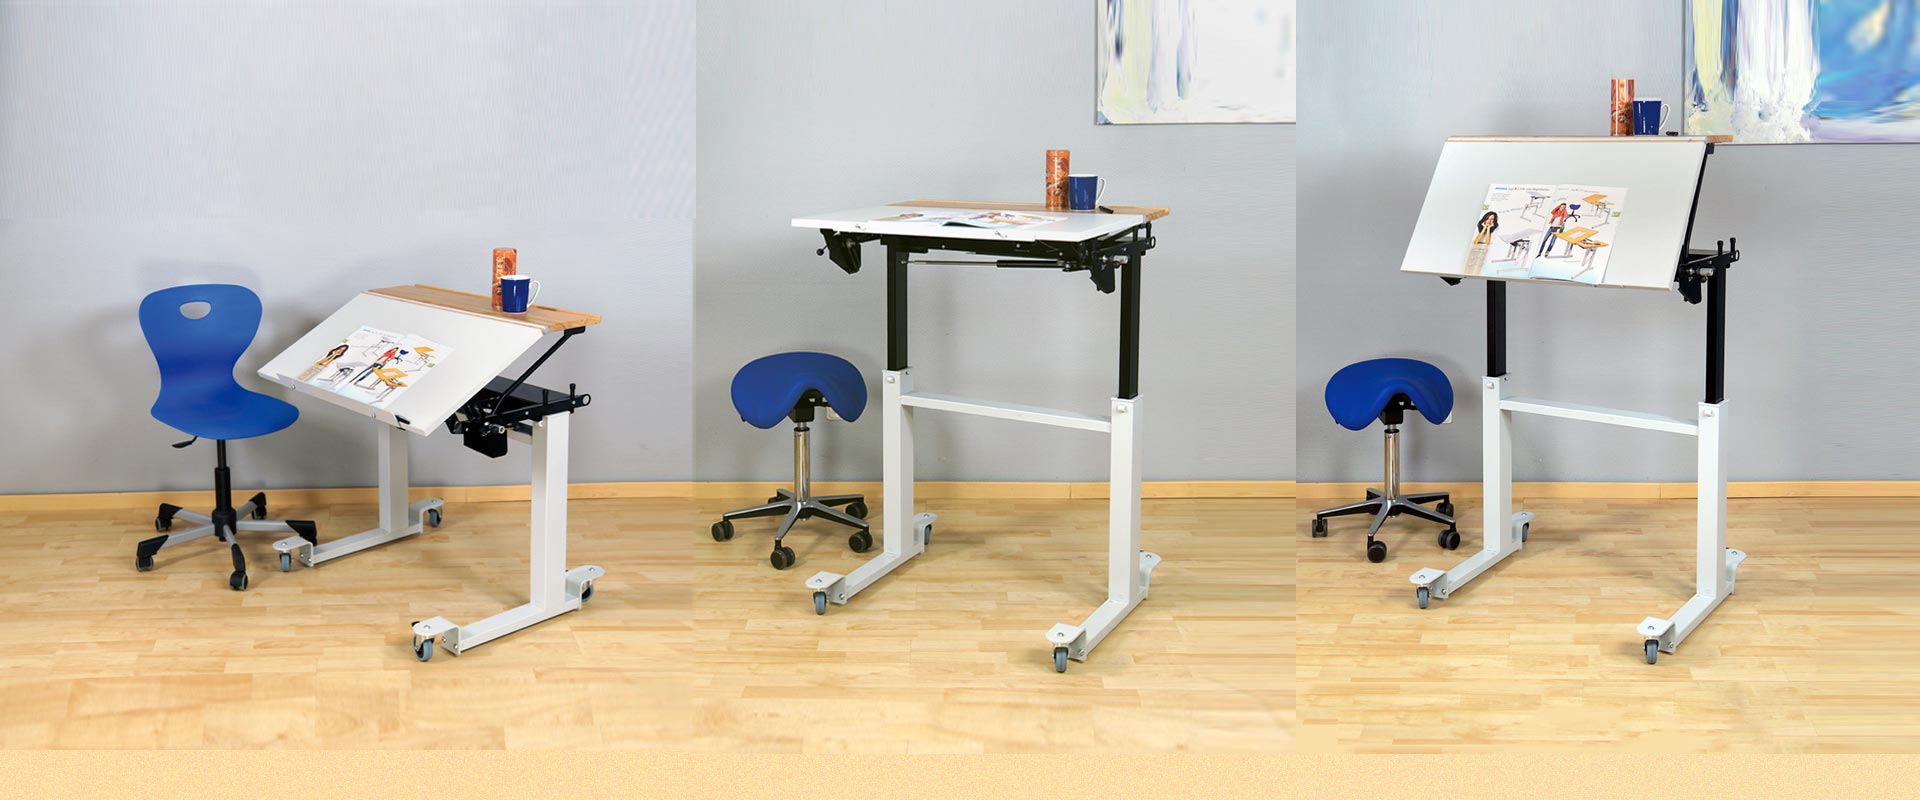 Moeckel Hight And Inclination Adjustable Desks And Tables